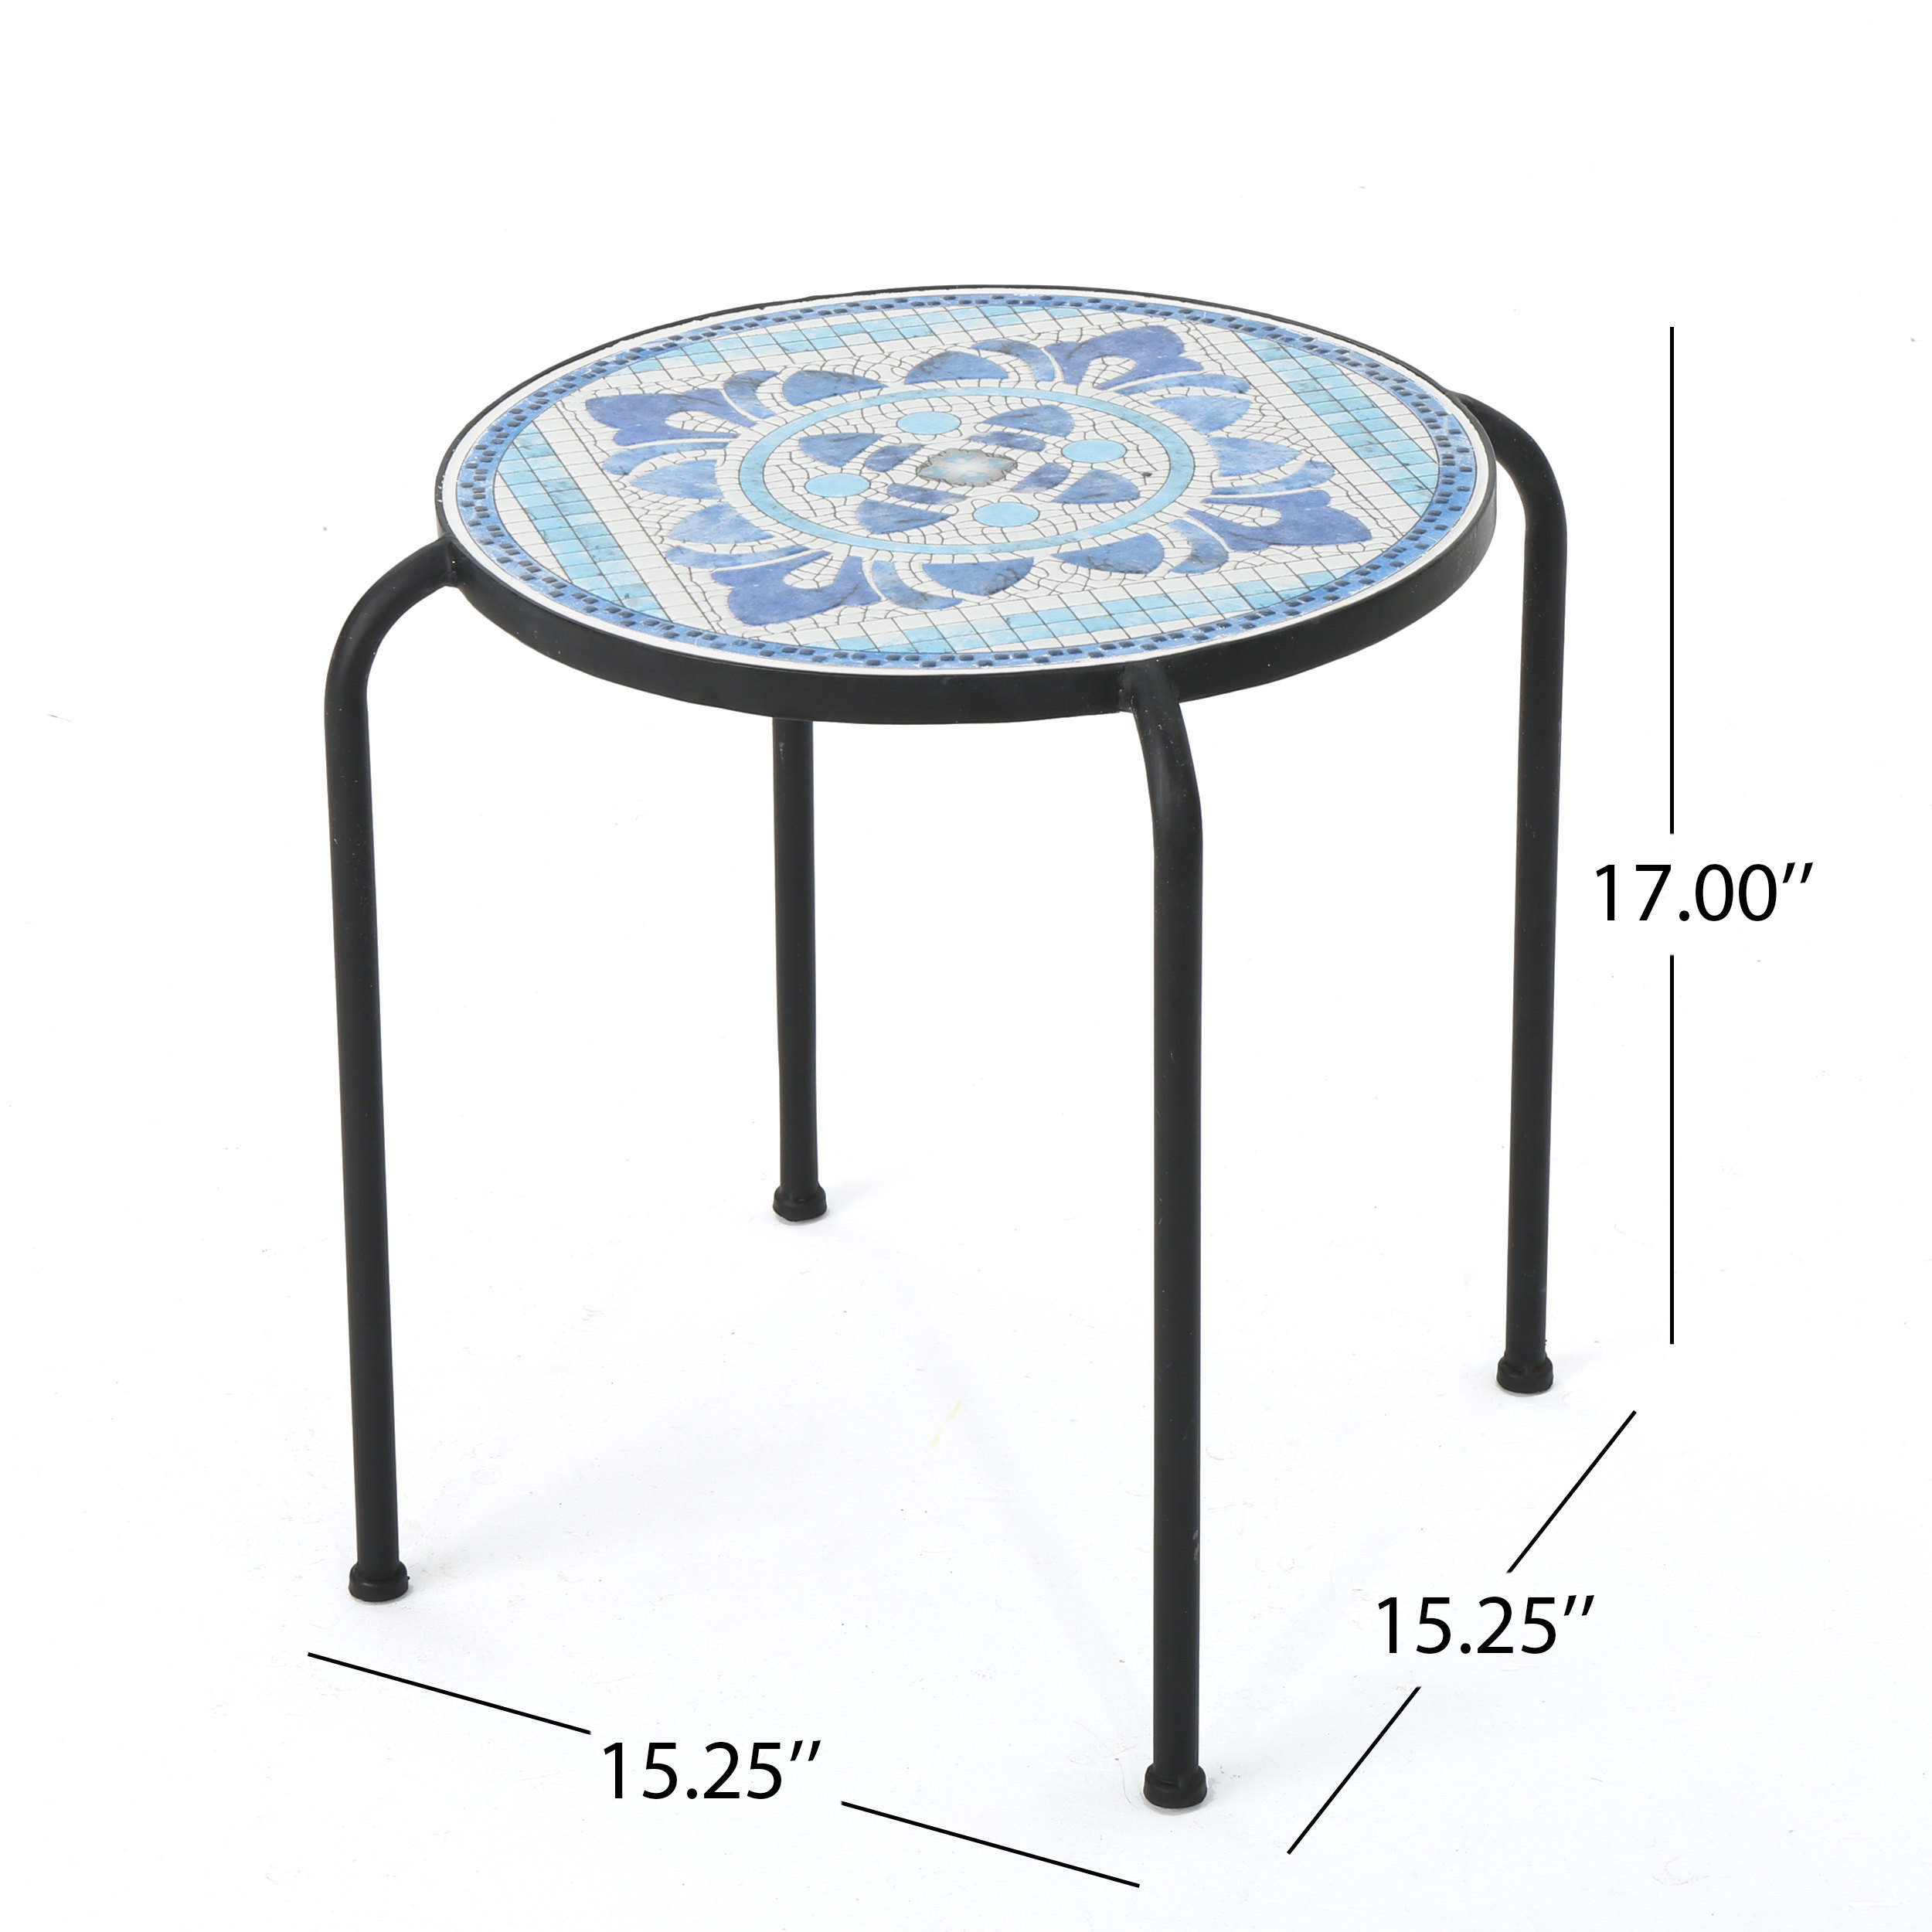 Sindarin Outdoor Ceramic Tile Round Side Table, Blue and White - image 3 of 5